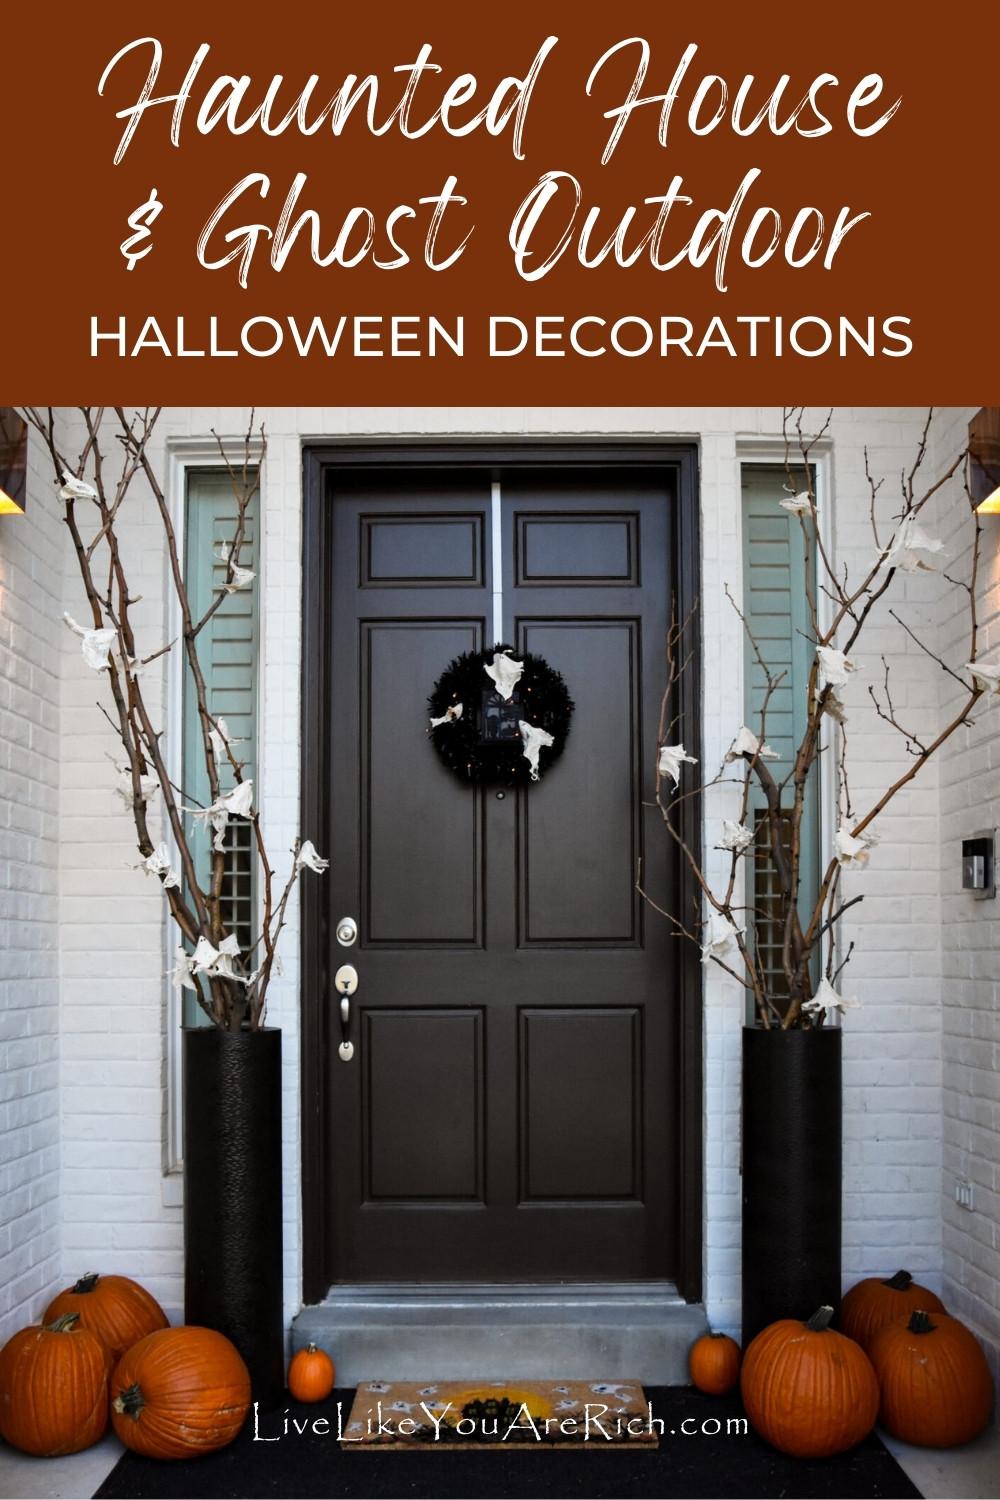 Haunted House & Ghost Outdoor Halloween Decorations